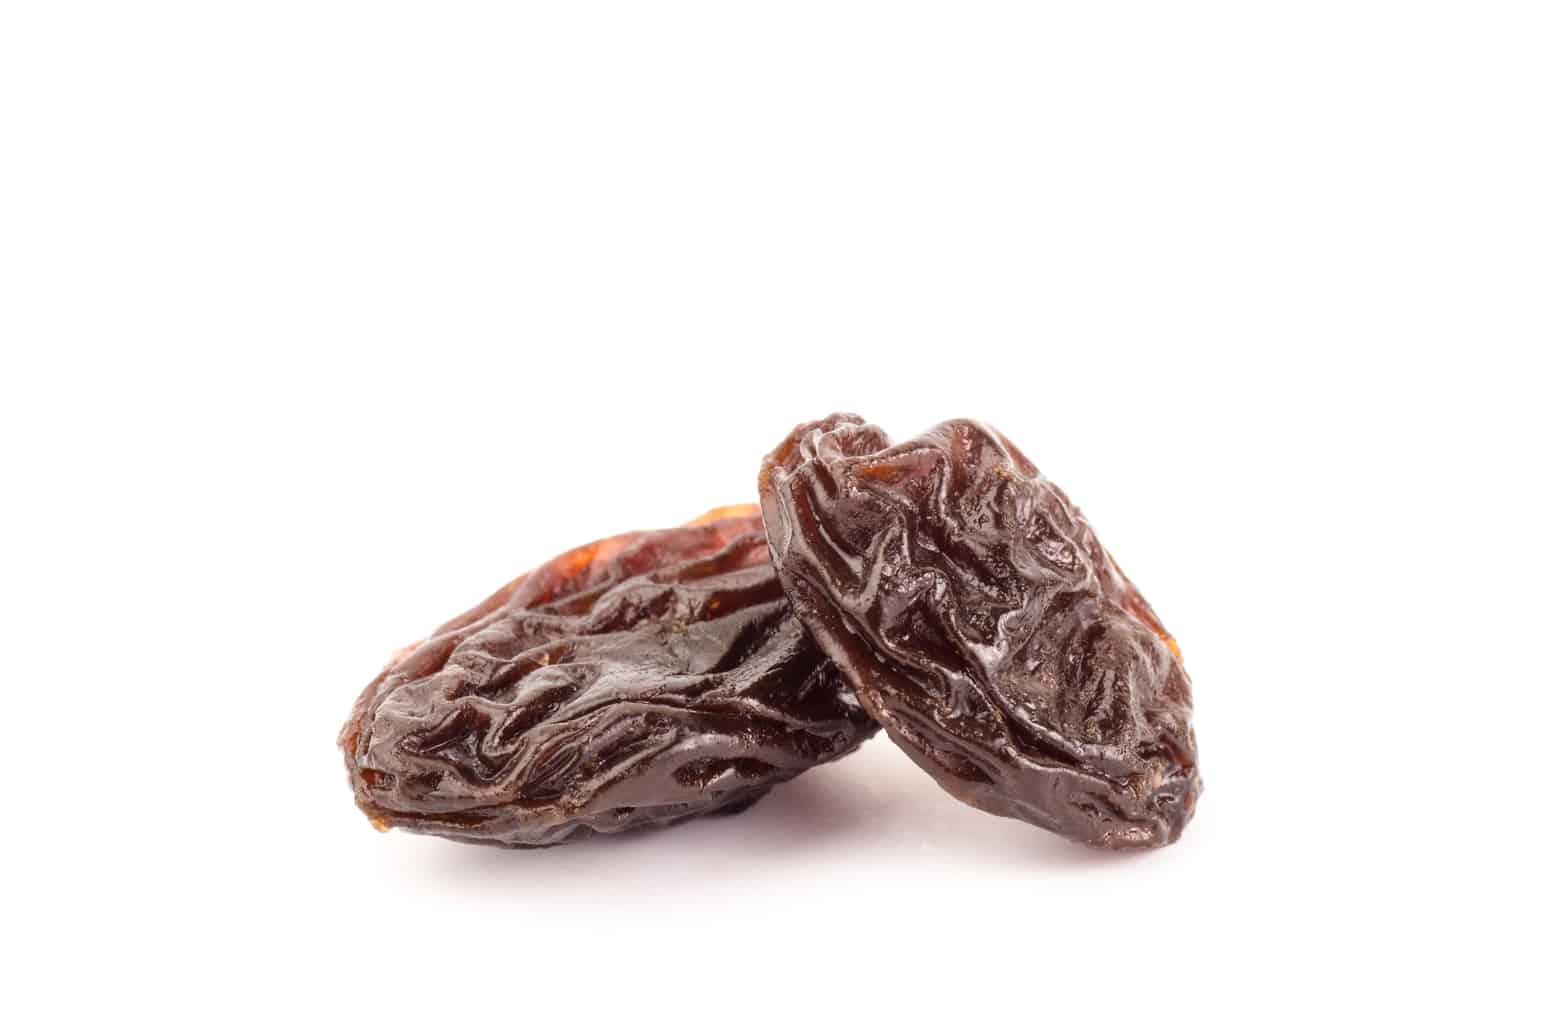 Balls dry up “like raisins” from this food additive